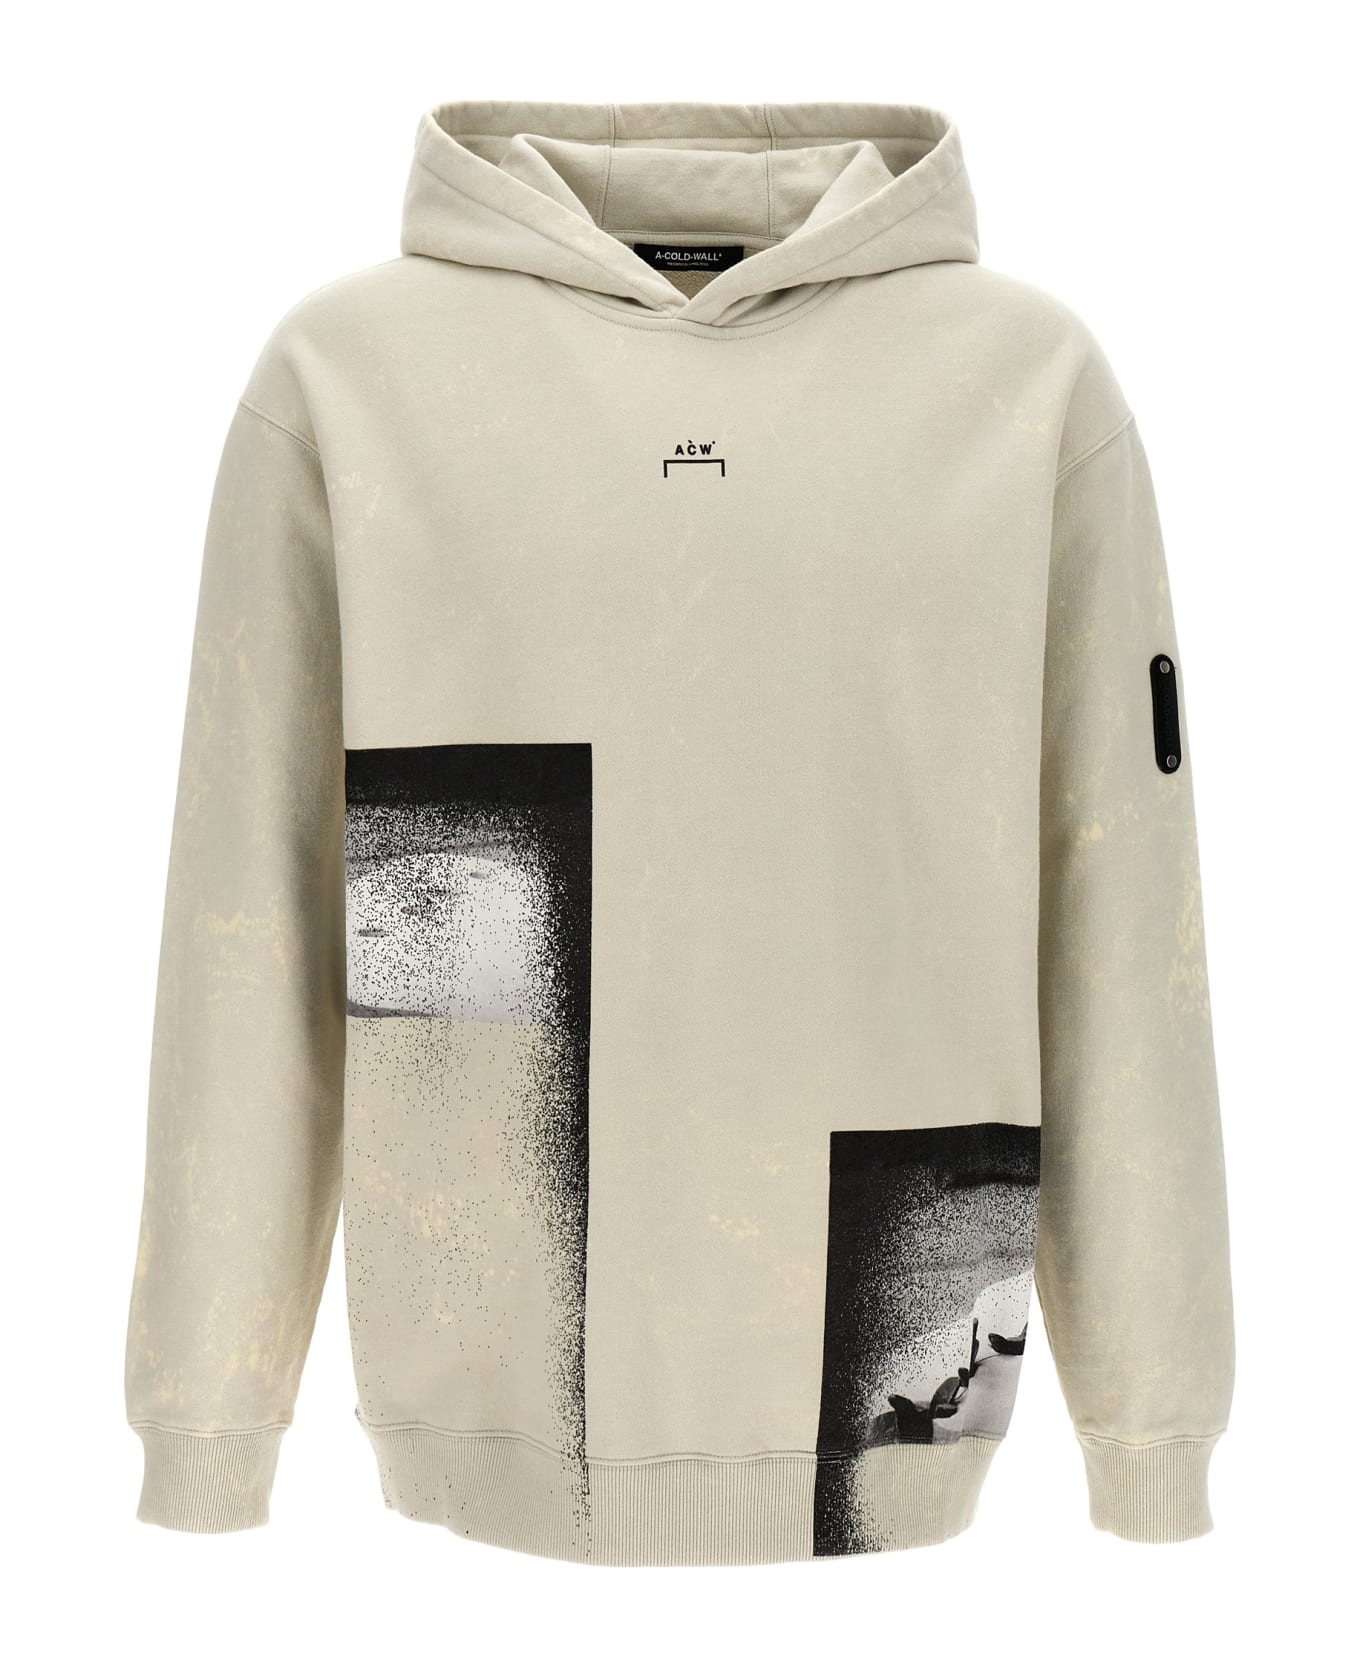 A-COLD-WALL 'bouchards' Hoodie - Multicolor フリース